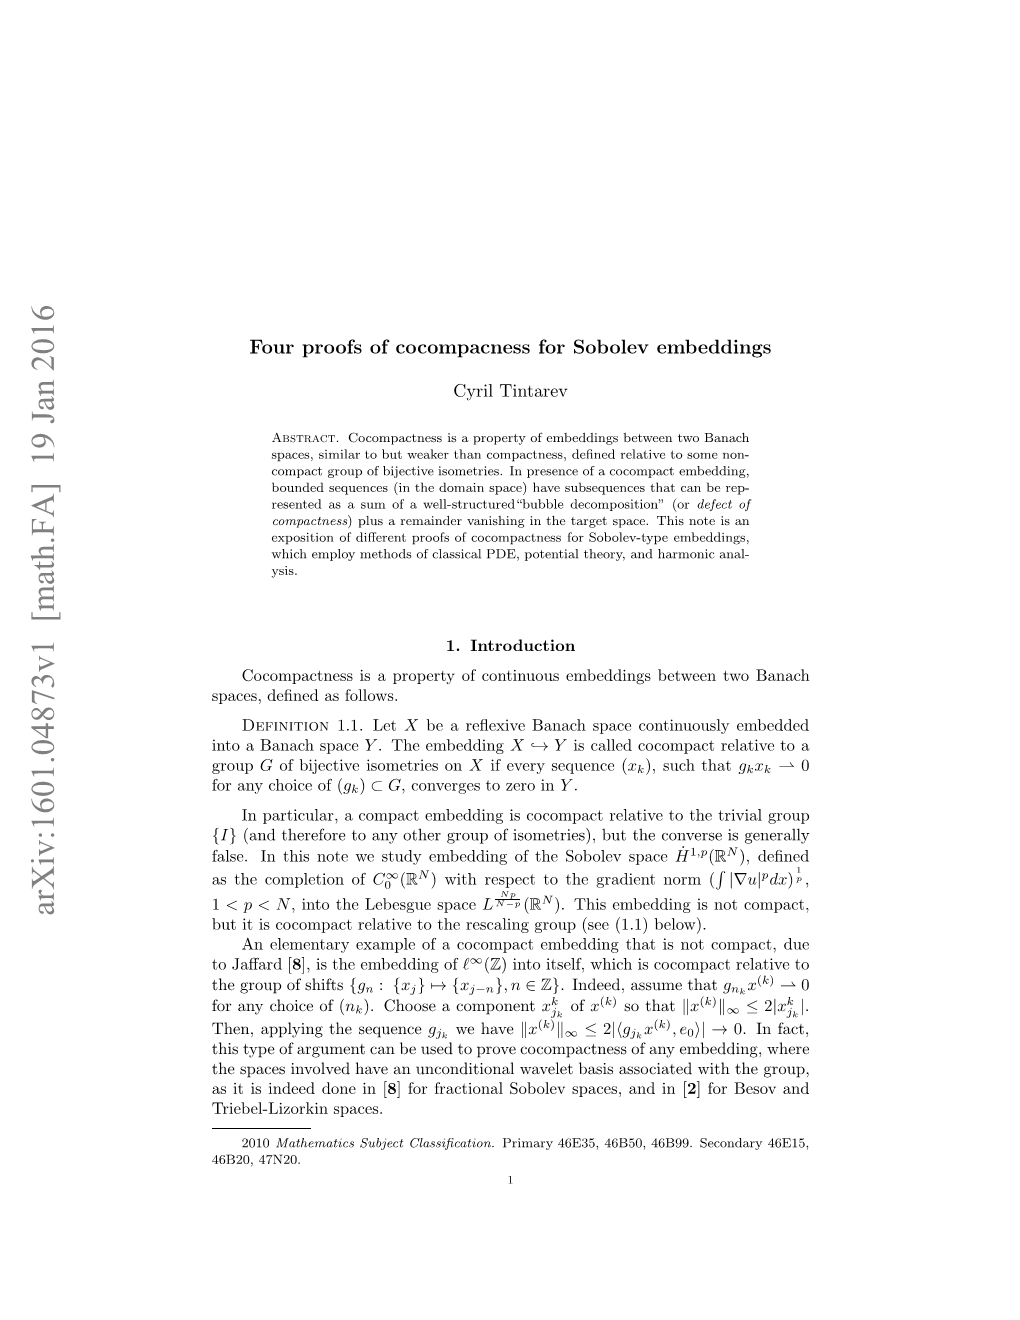 Four Proofs of Cocompacness for Sobolev Embeddings 3